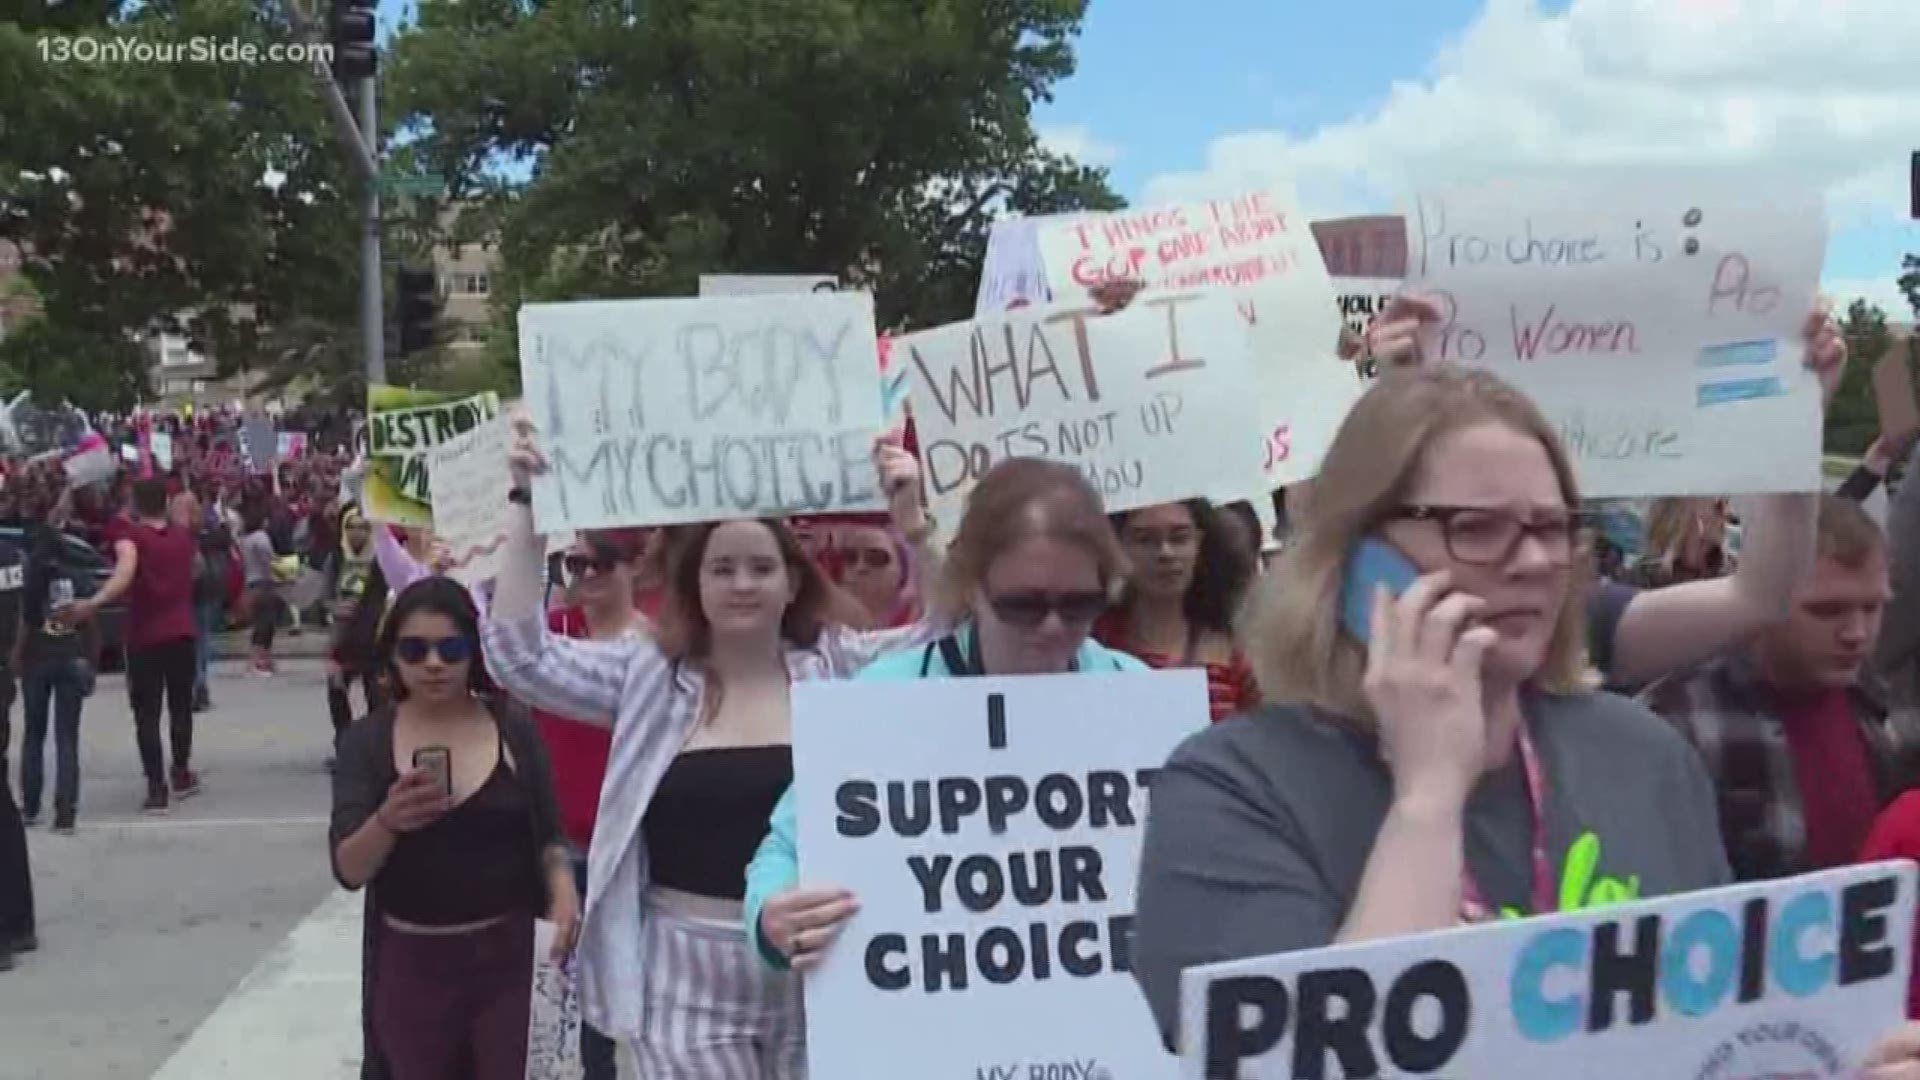 Groups backing two anti-abortion ballot drives in Michigan are poised to begin gathering signatures after clearing procedural steps.